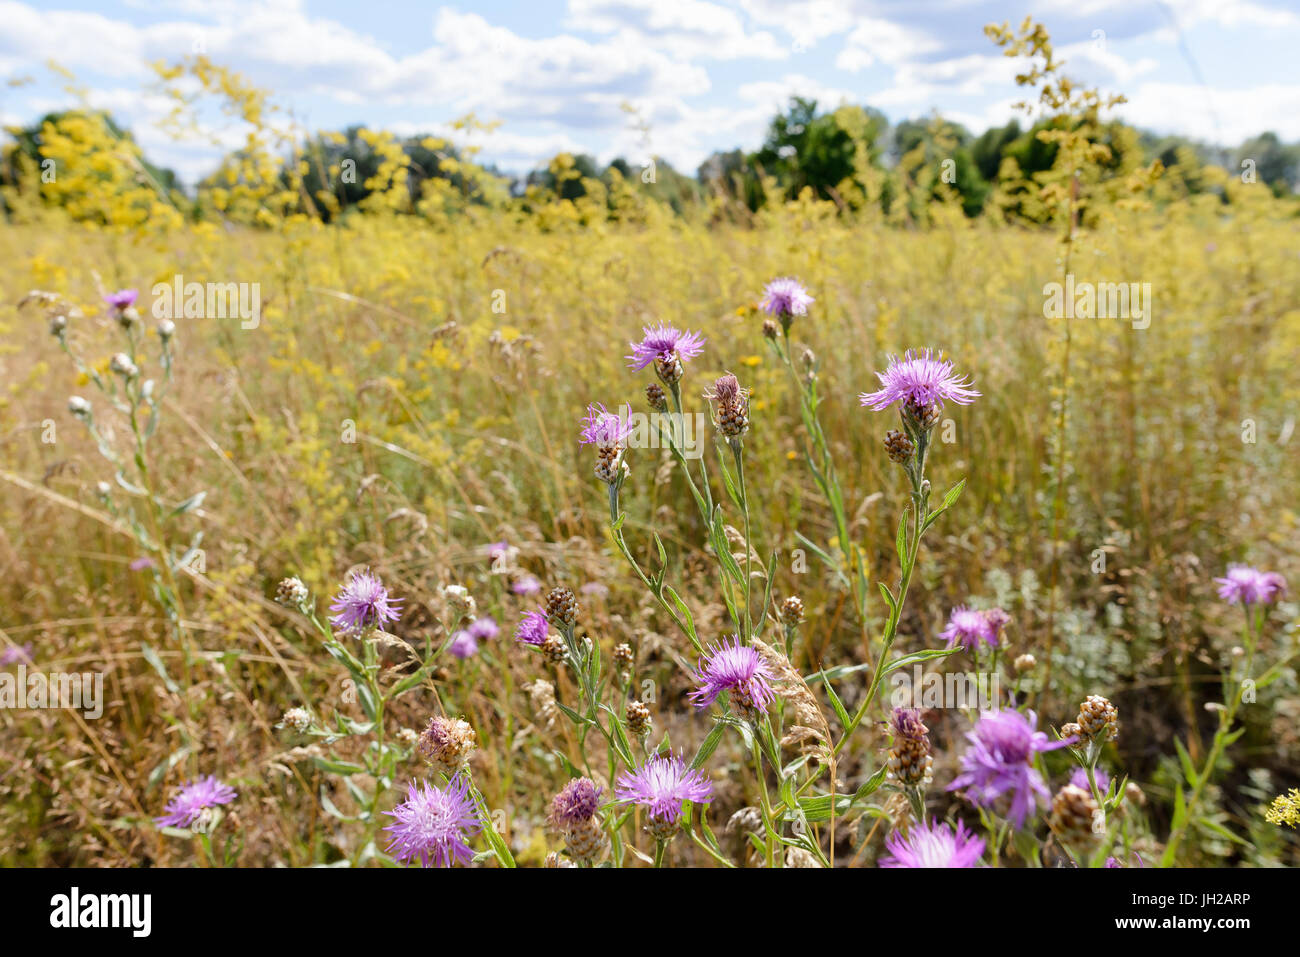 Centaurea Scabiosa flowers with buds,  also known as  greater knapweed, is growing in the meadow close to the Dnieper River in Kiev, Ukraine, under th Stock Photo